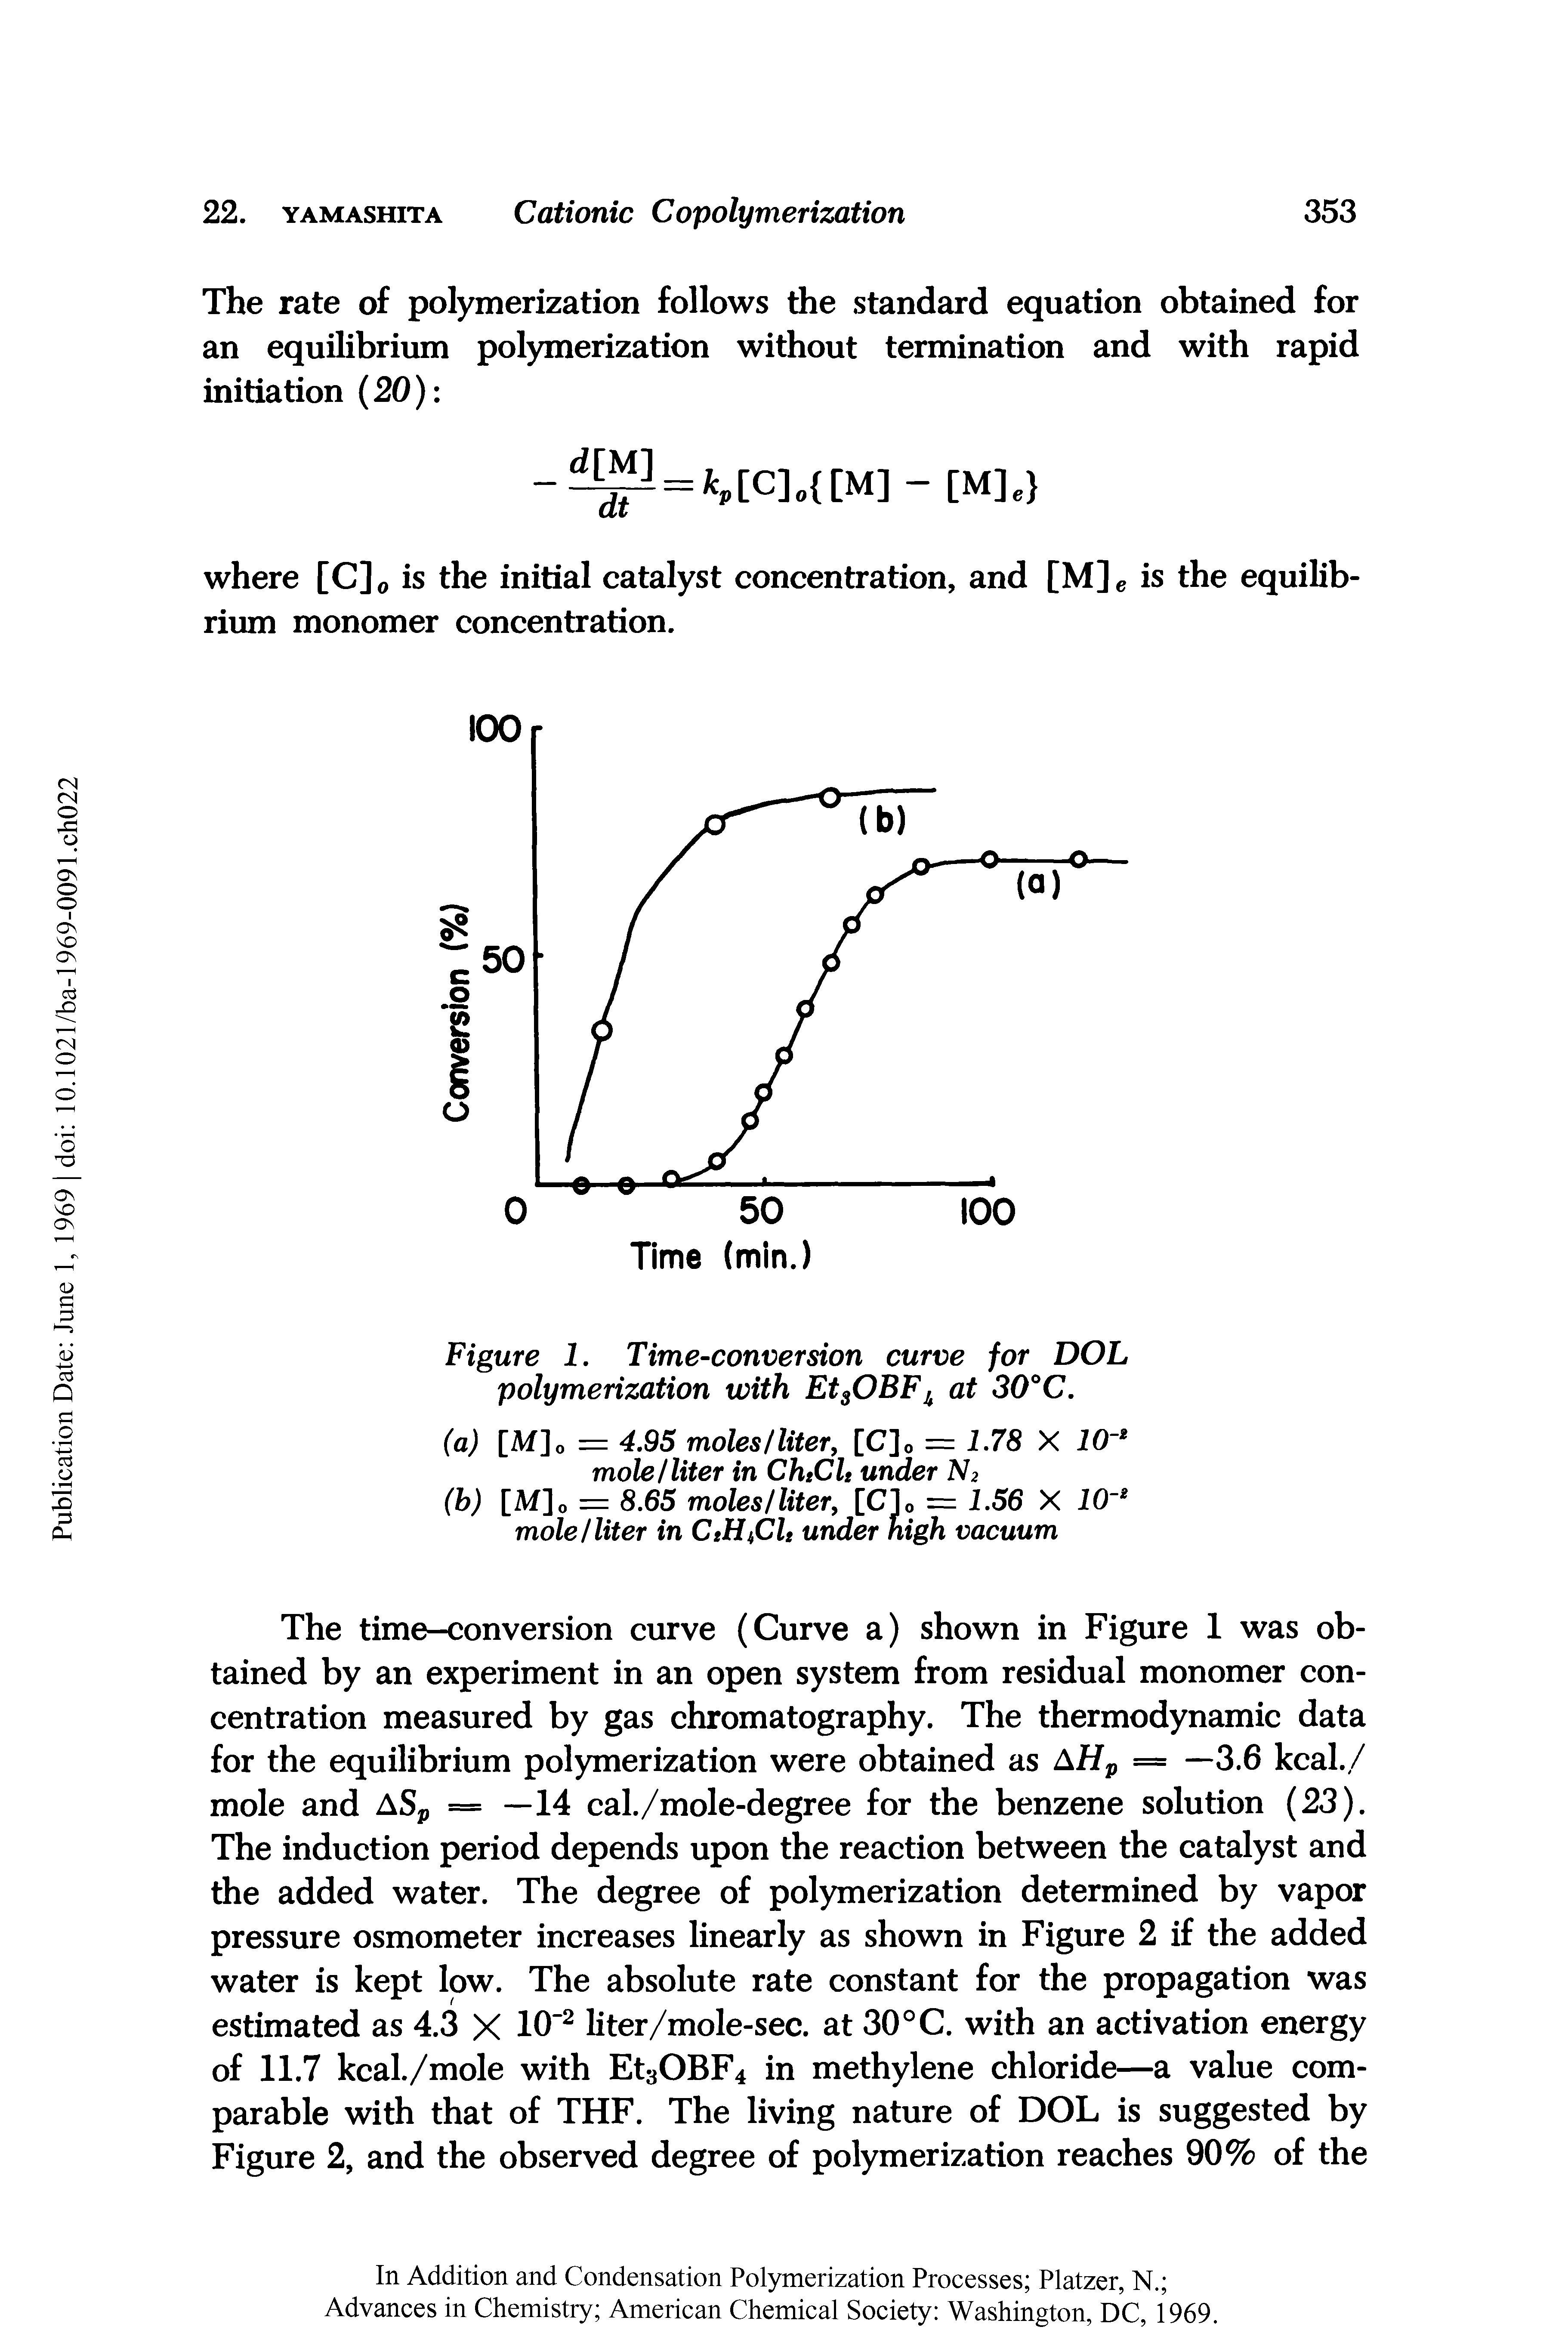 Figure 1. Time-conversion curve for DOL polymerization with EtsOBFh at 30°C.